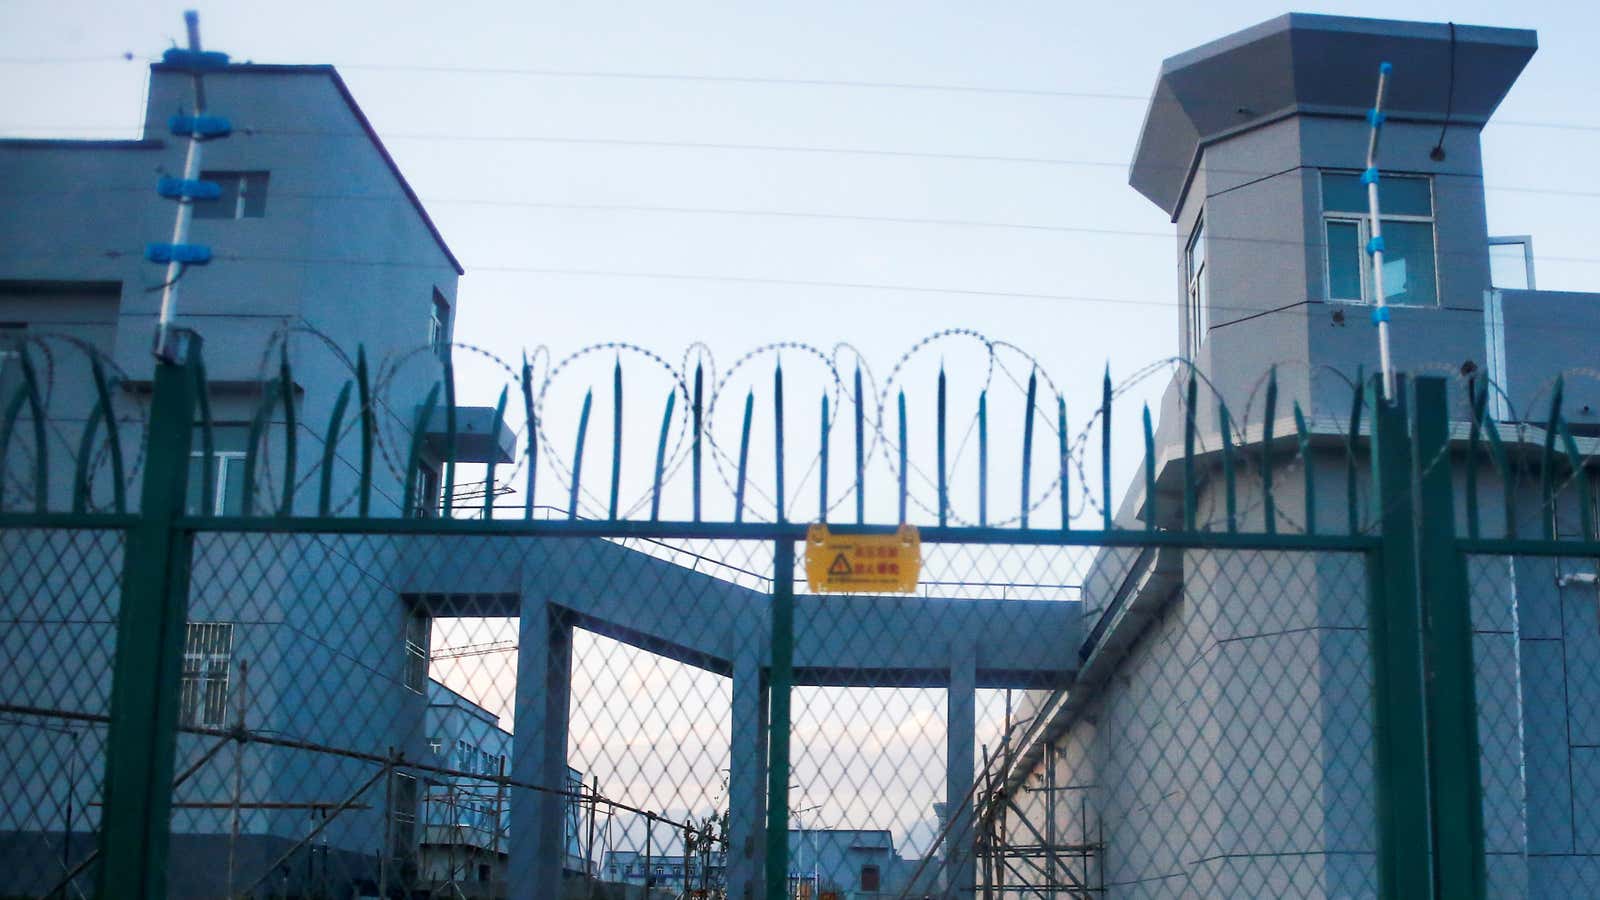 Many facilities like this one in Xinjiang are centers where Uyghurs are pressed into forced labor, experts say.